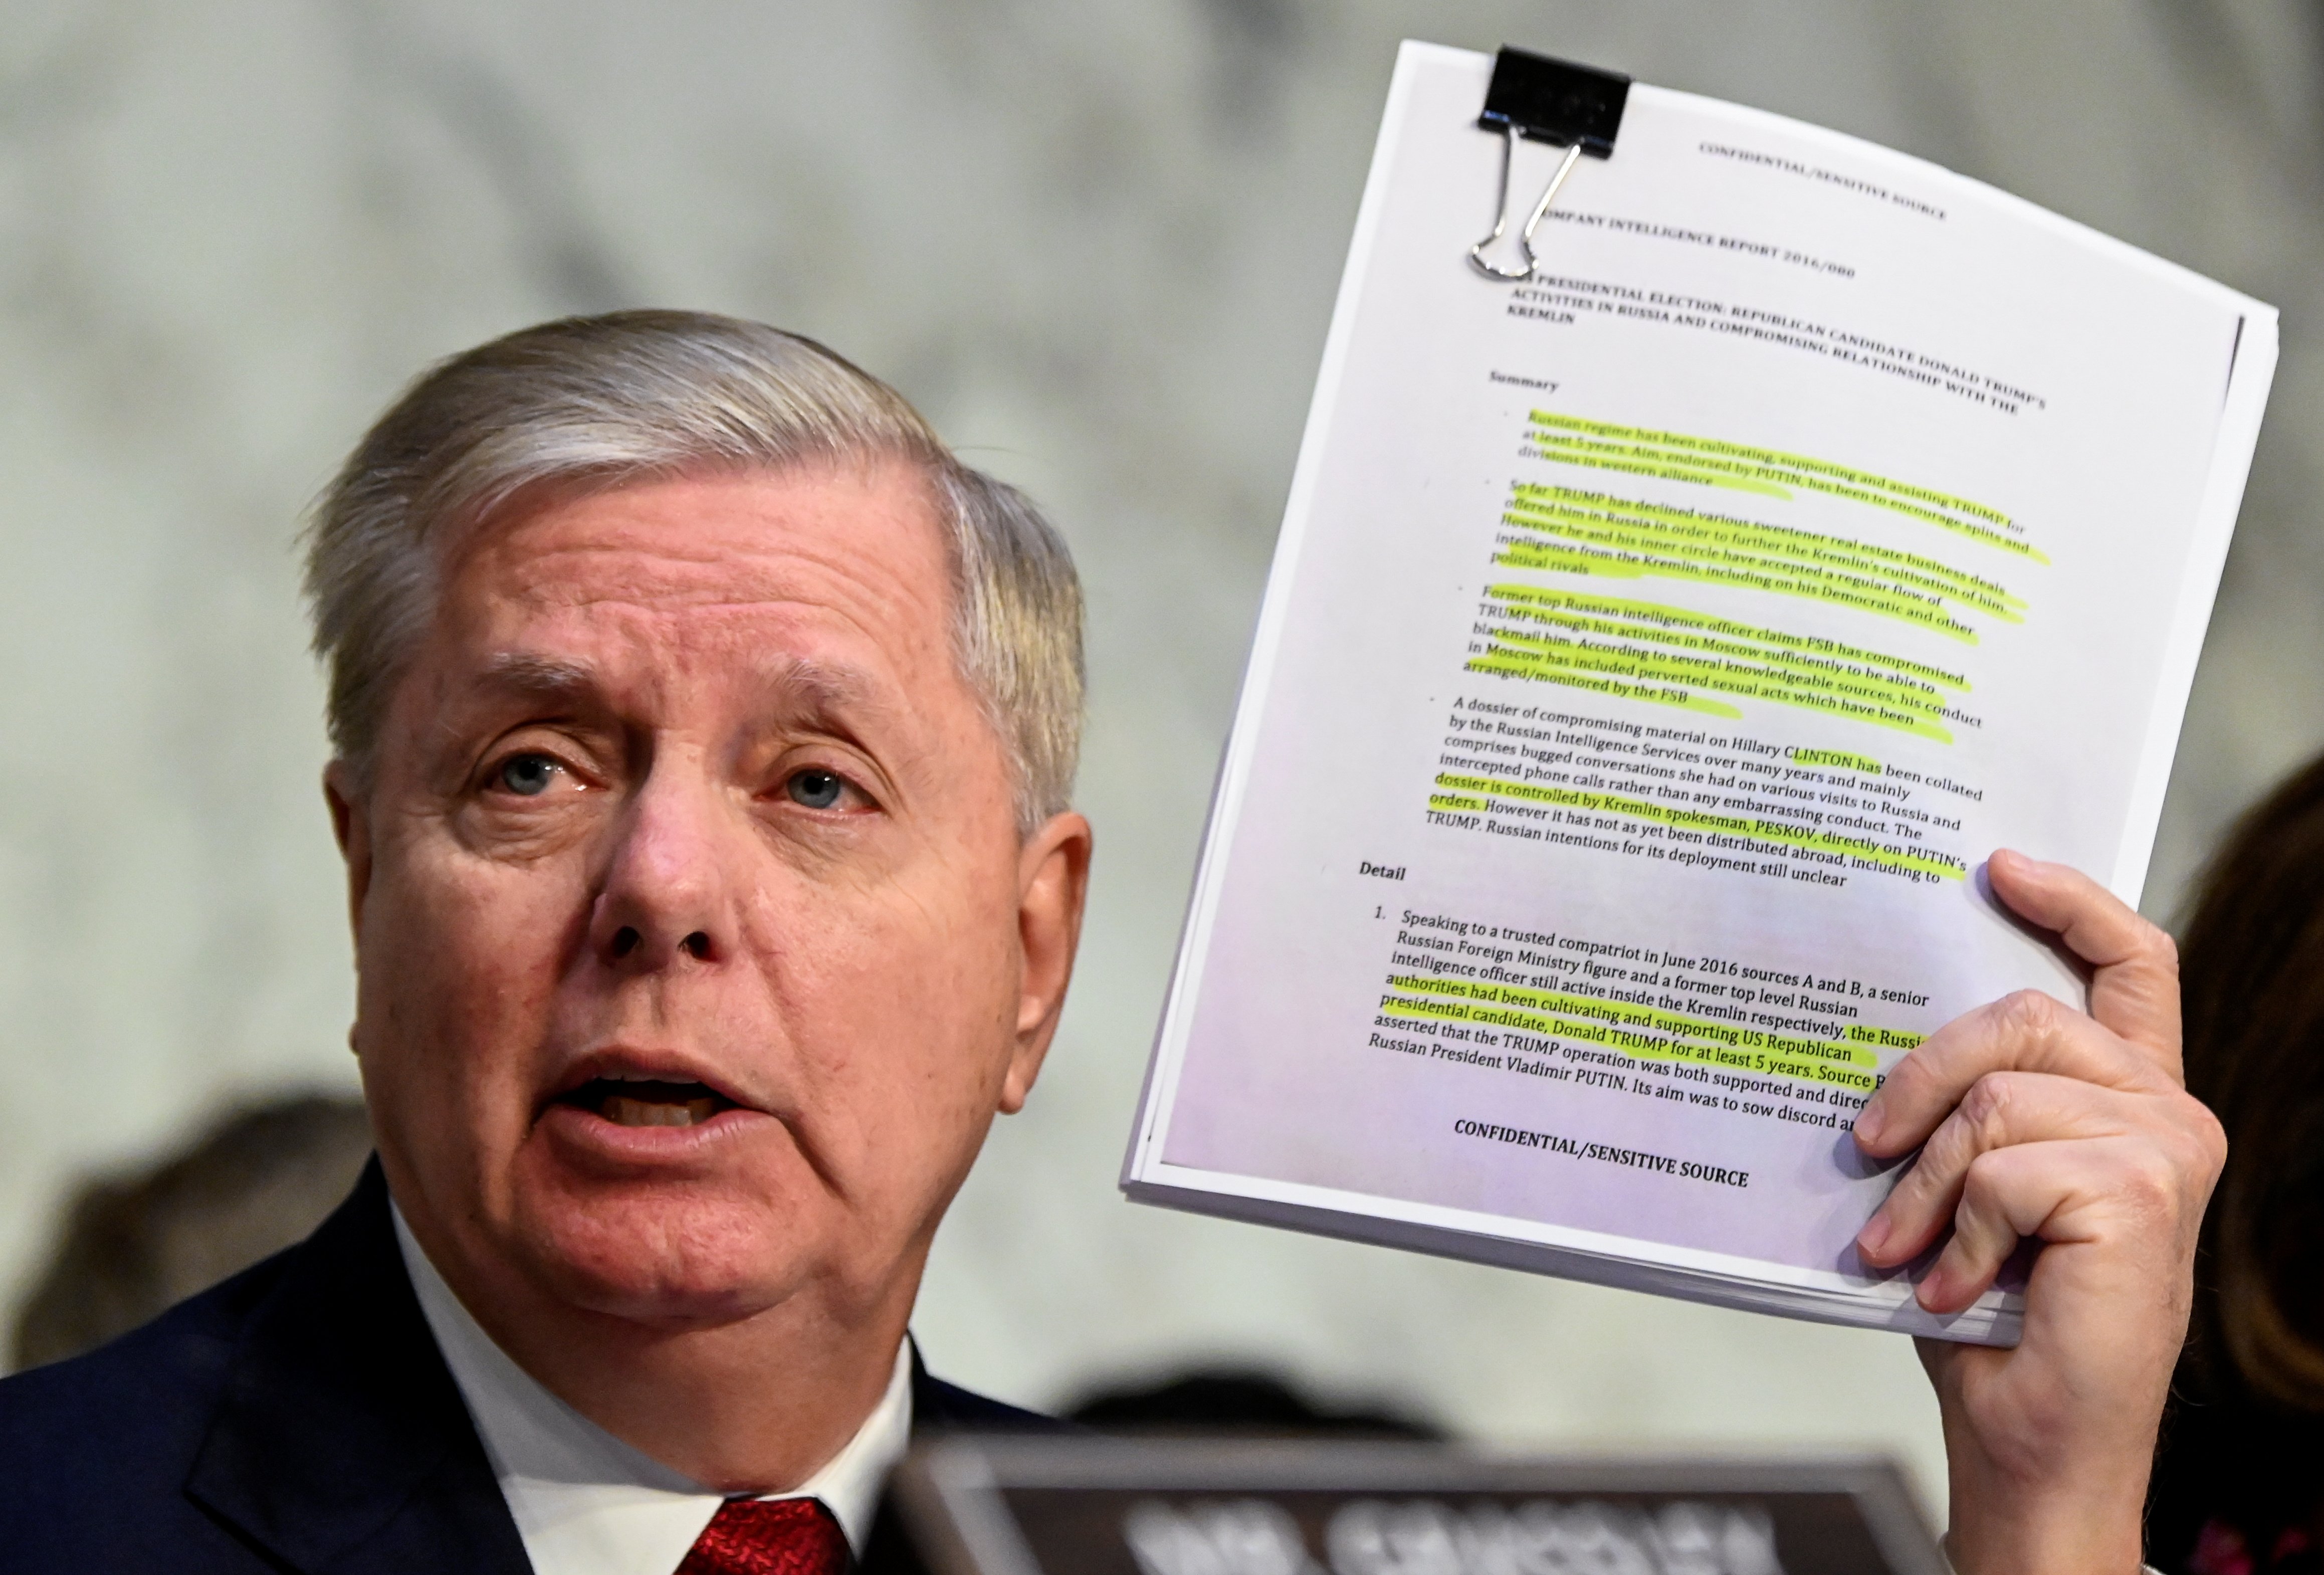 U.S. Senate Judiciary Committee Chairman Senator Lindsey Graham (R-SC) holds a copy of an intelligence report on the Steele dossier as he delivers an opening statement prior to hearing testimony from Justice Department Inspector General Michael Horowitz before a Senate Judiciary Committee hearing "Examining the Inspector General's report on alleged abuses of the Foreign Intelligence Surveillance Act (FISA)" on Capitol Hill in Washington, U.S., December 11, 2019. (REUTERS/Erin Scott - RC23TD9M7QI4)